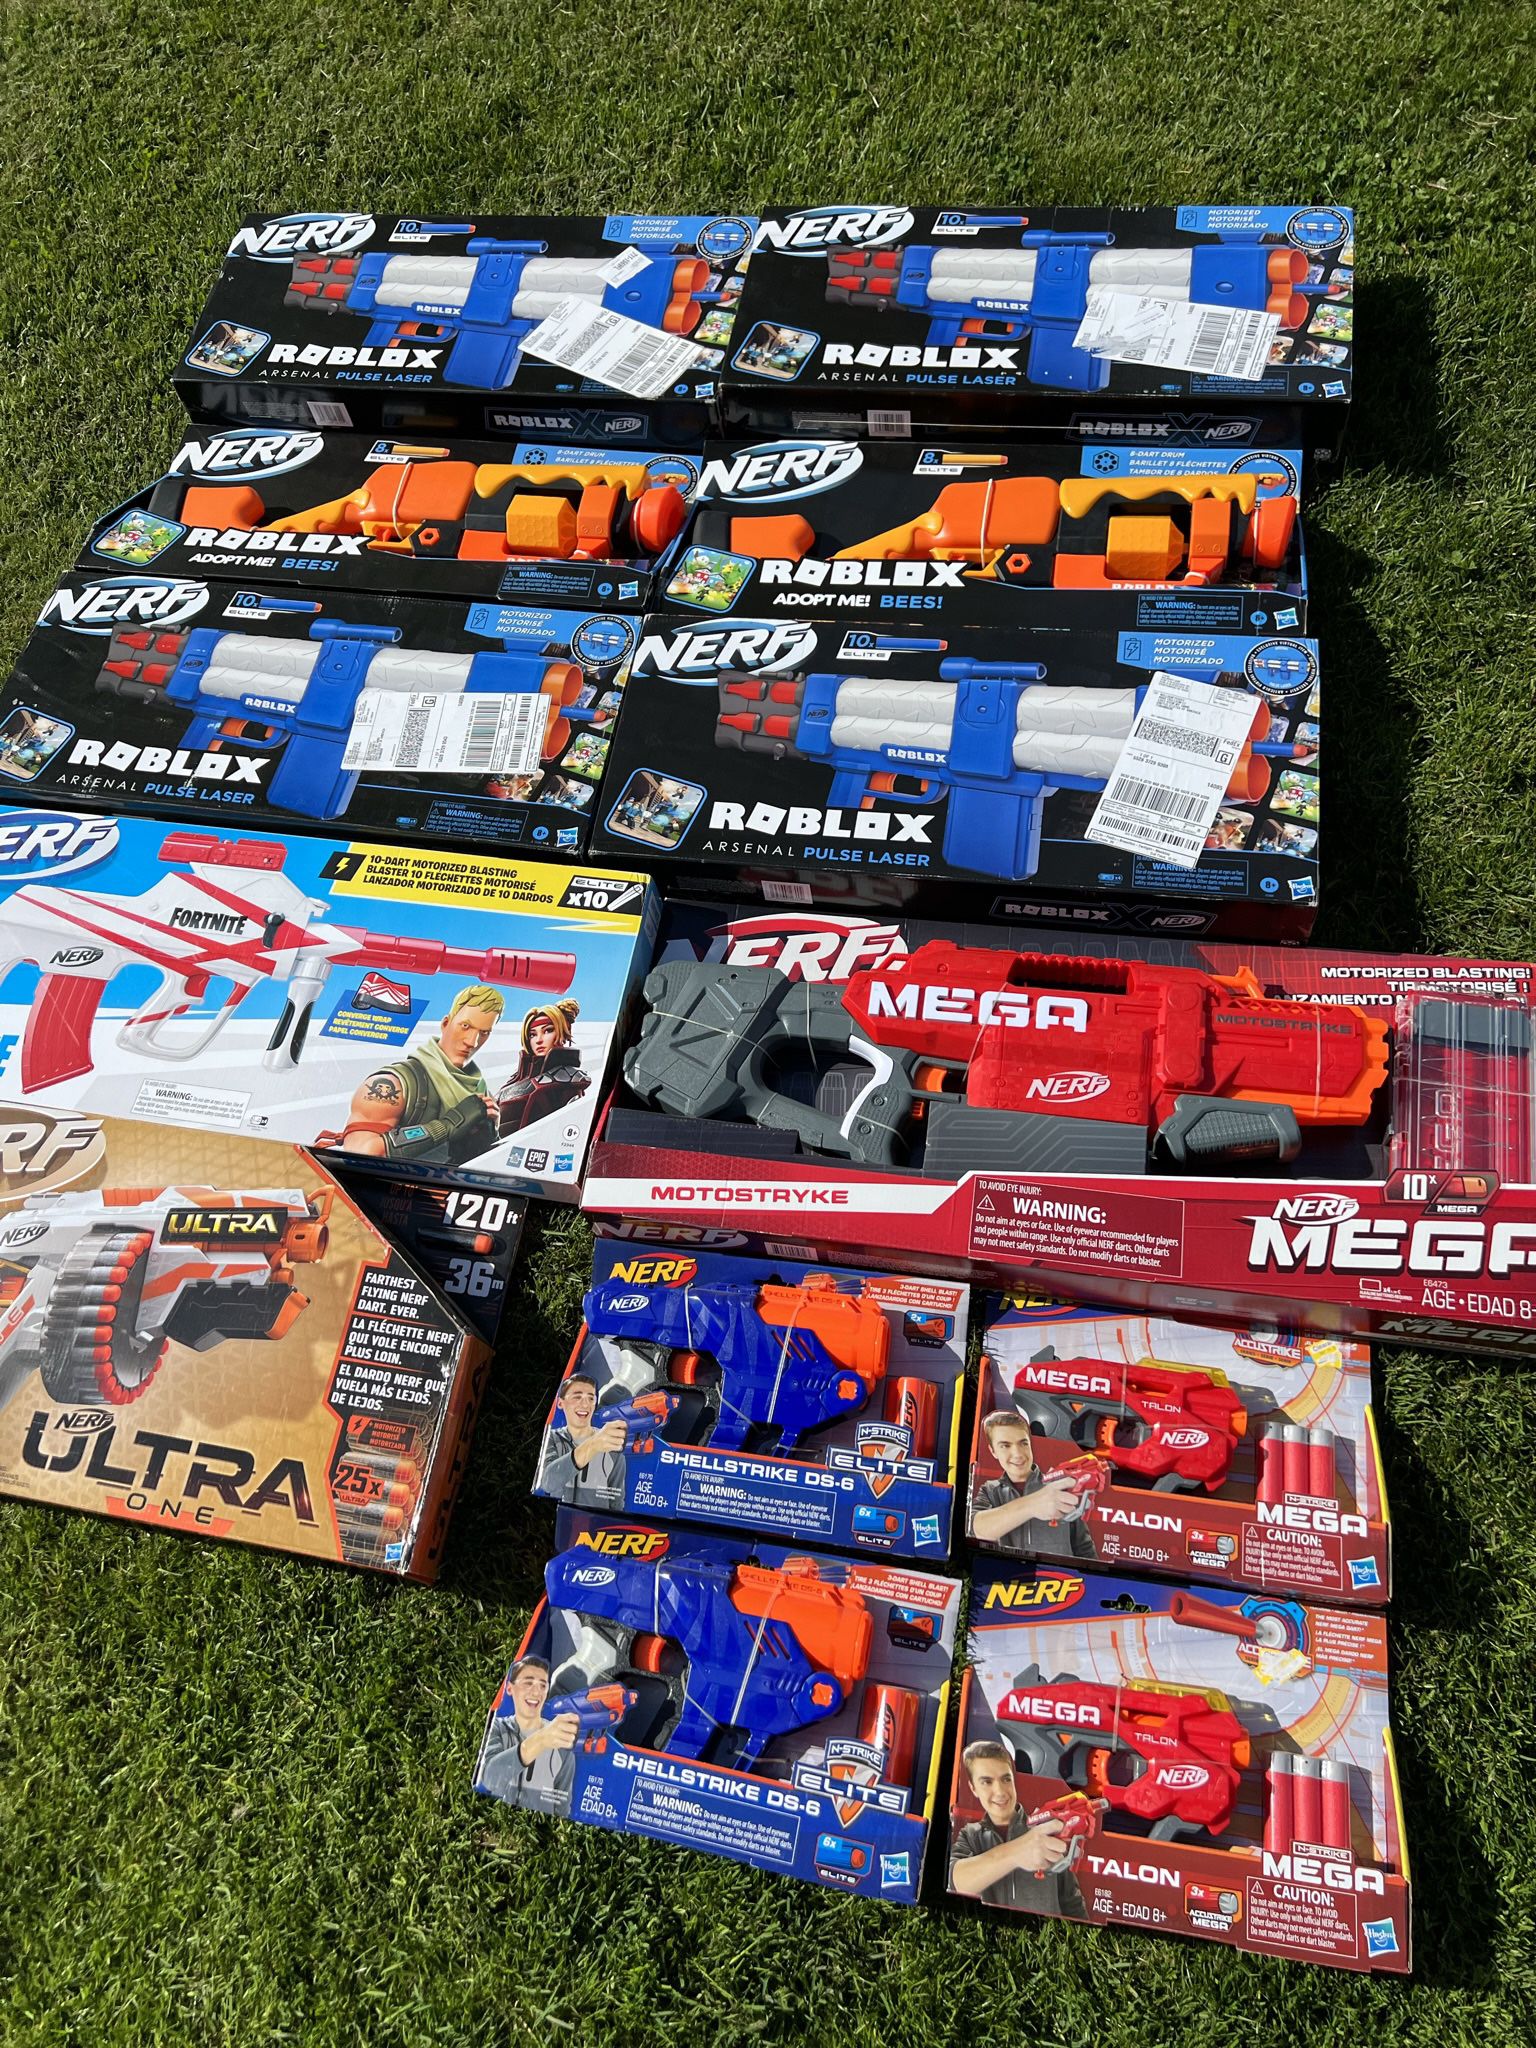 NERF GUN LOT HUGE SEALED NEW IN BOX DEAL NERF WAR BIRTHDAY PARTY COLLECTION 